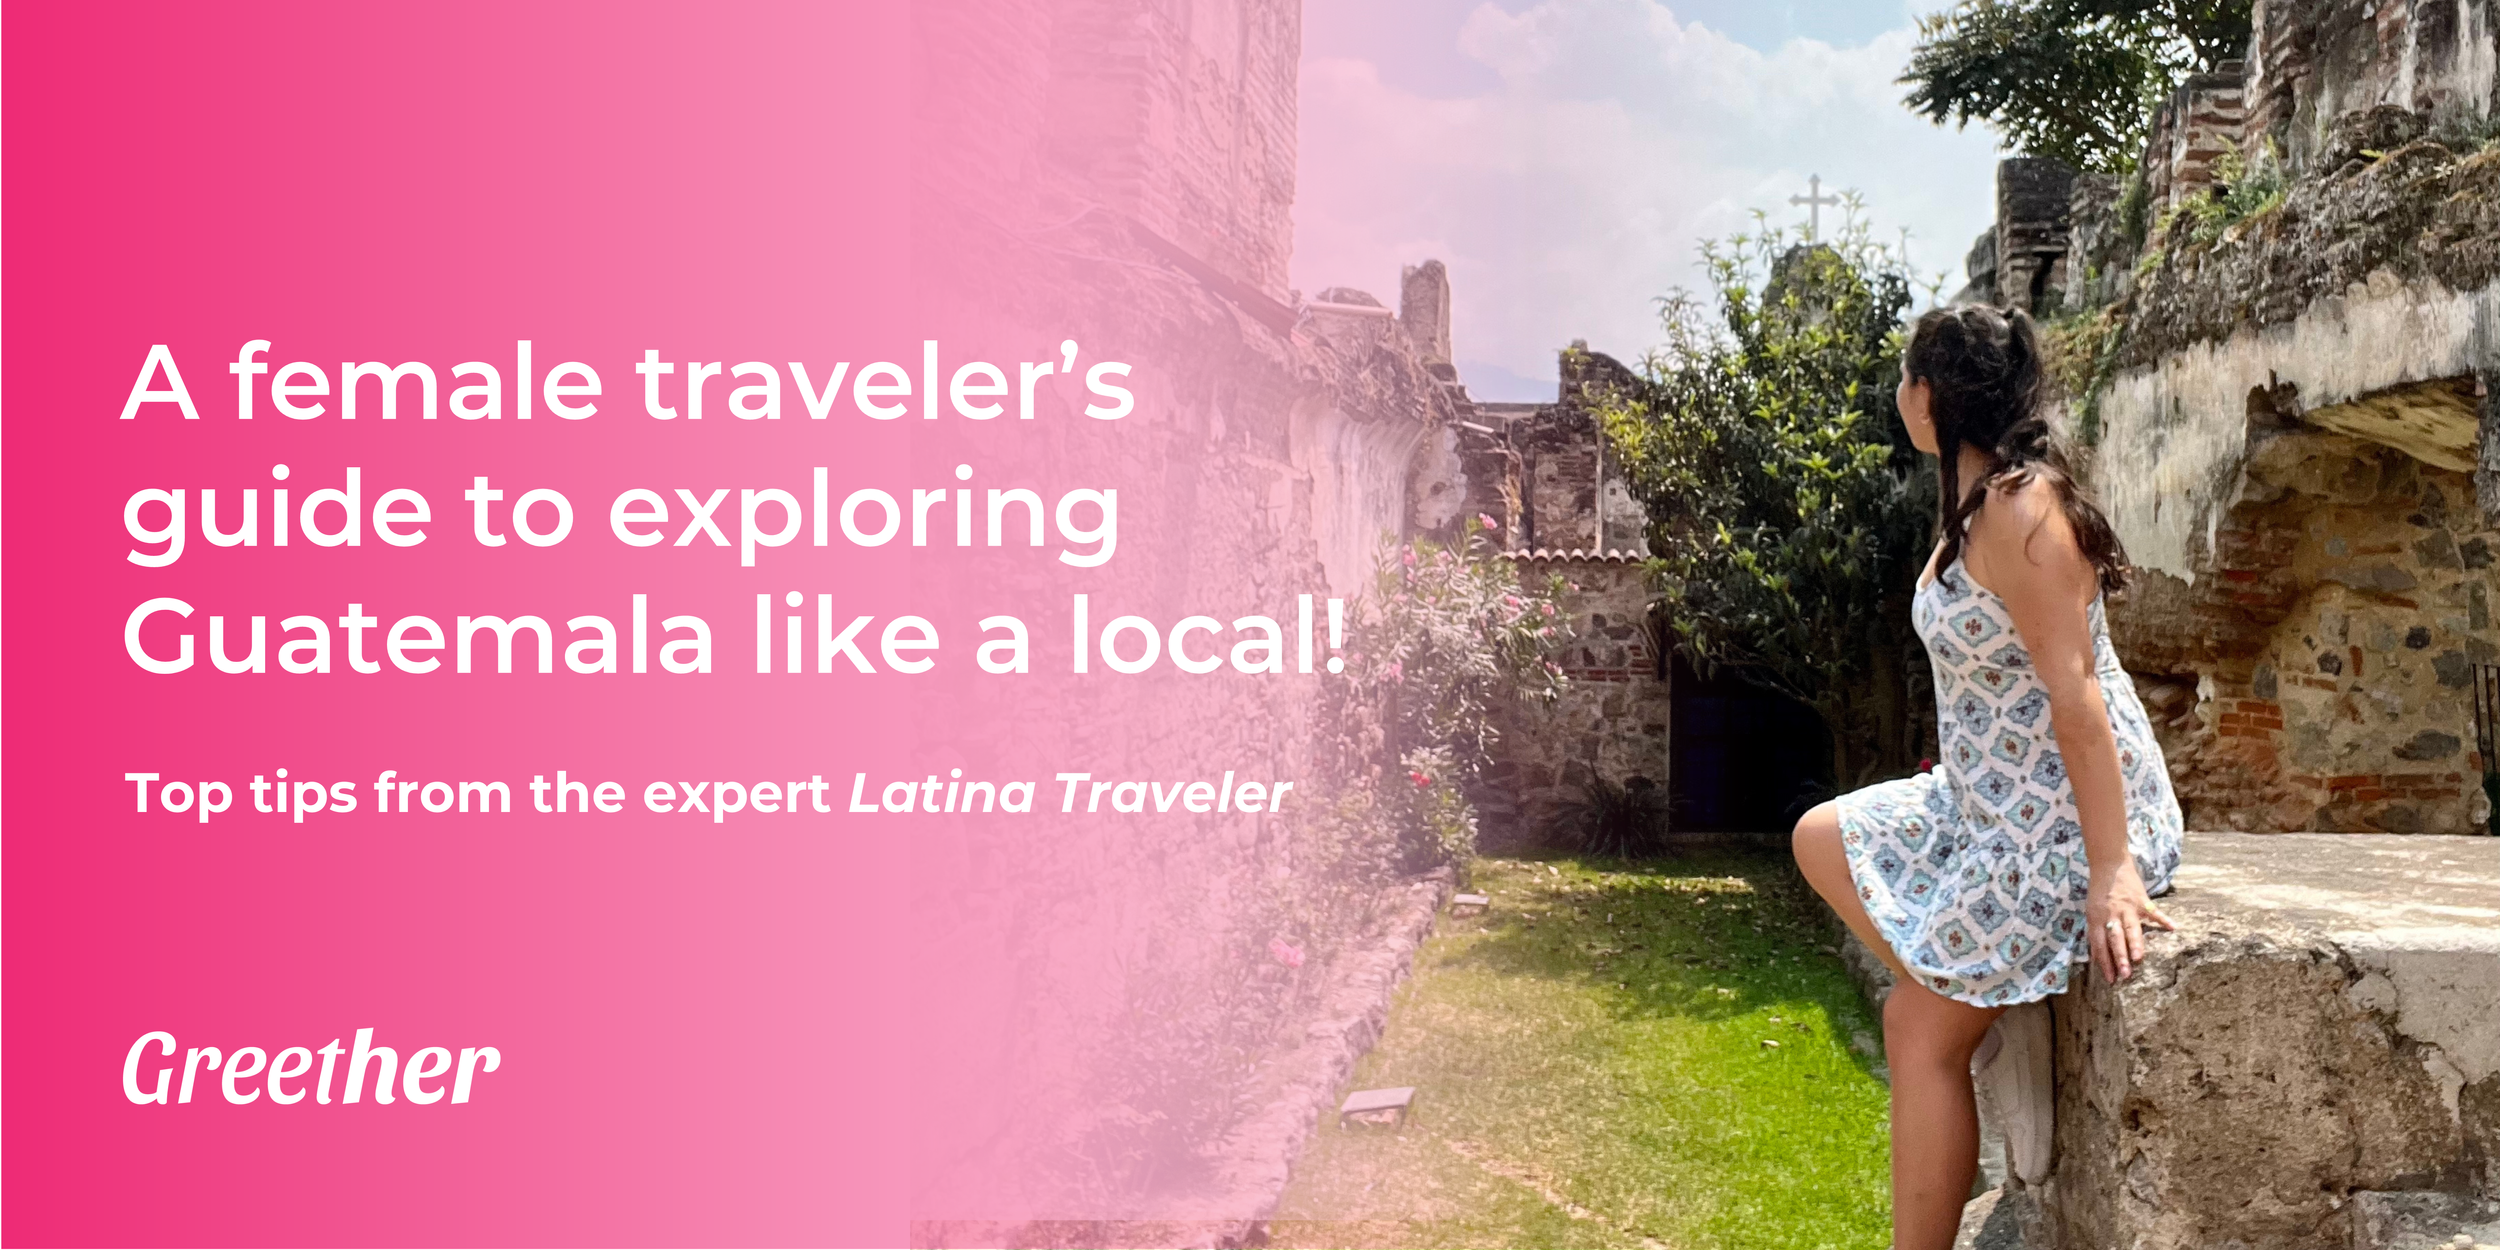 A female traveler’s guide to exploring Guatemala like a local!